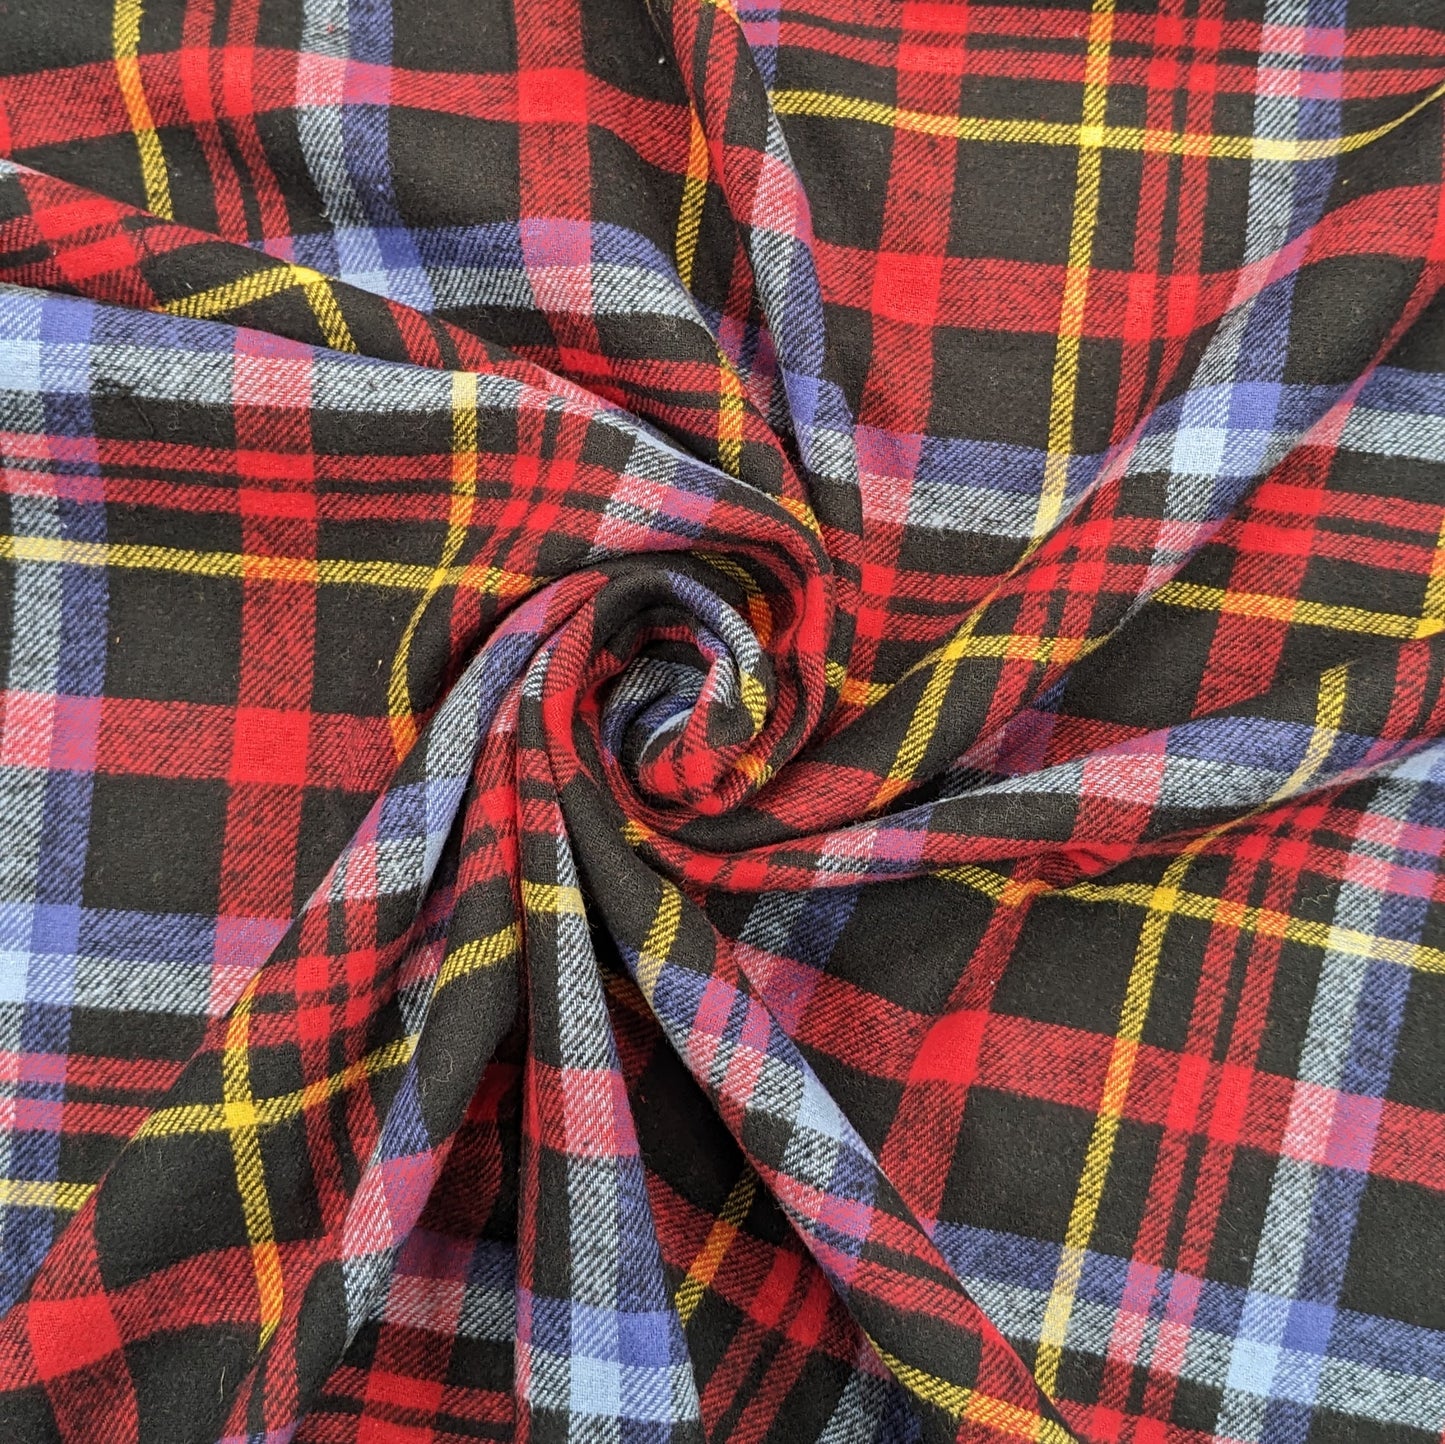 Brushed Cotton Fabric - Pink and Blue Check - Tartan